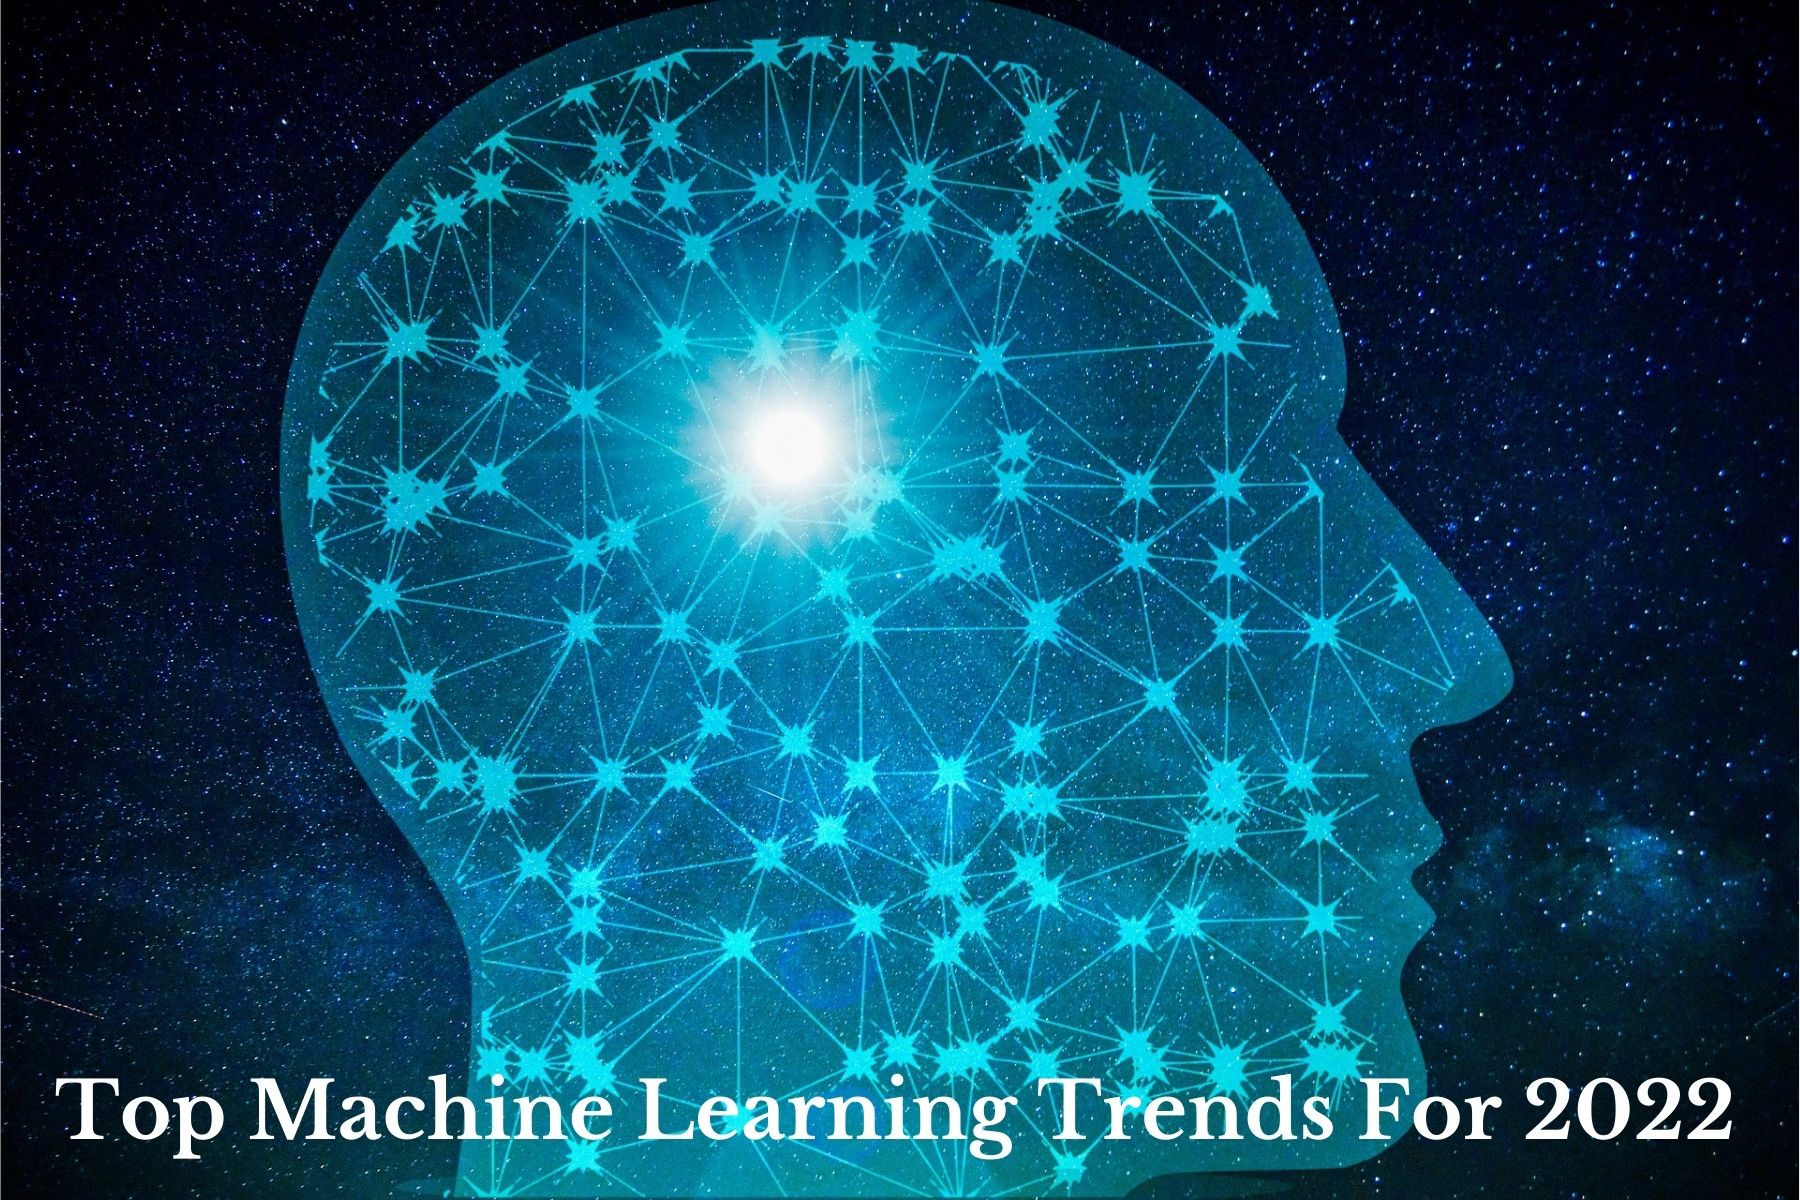 Top Machine Learning Trends For 2022 and Beyond